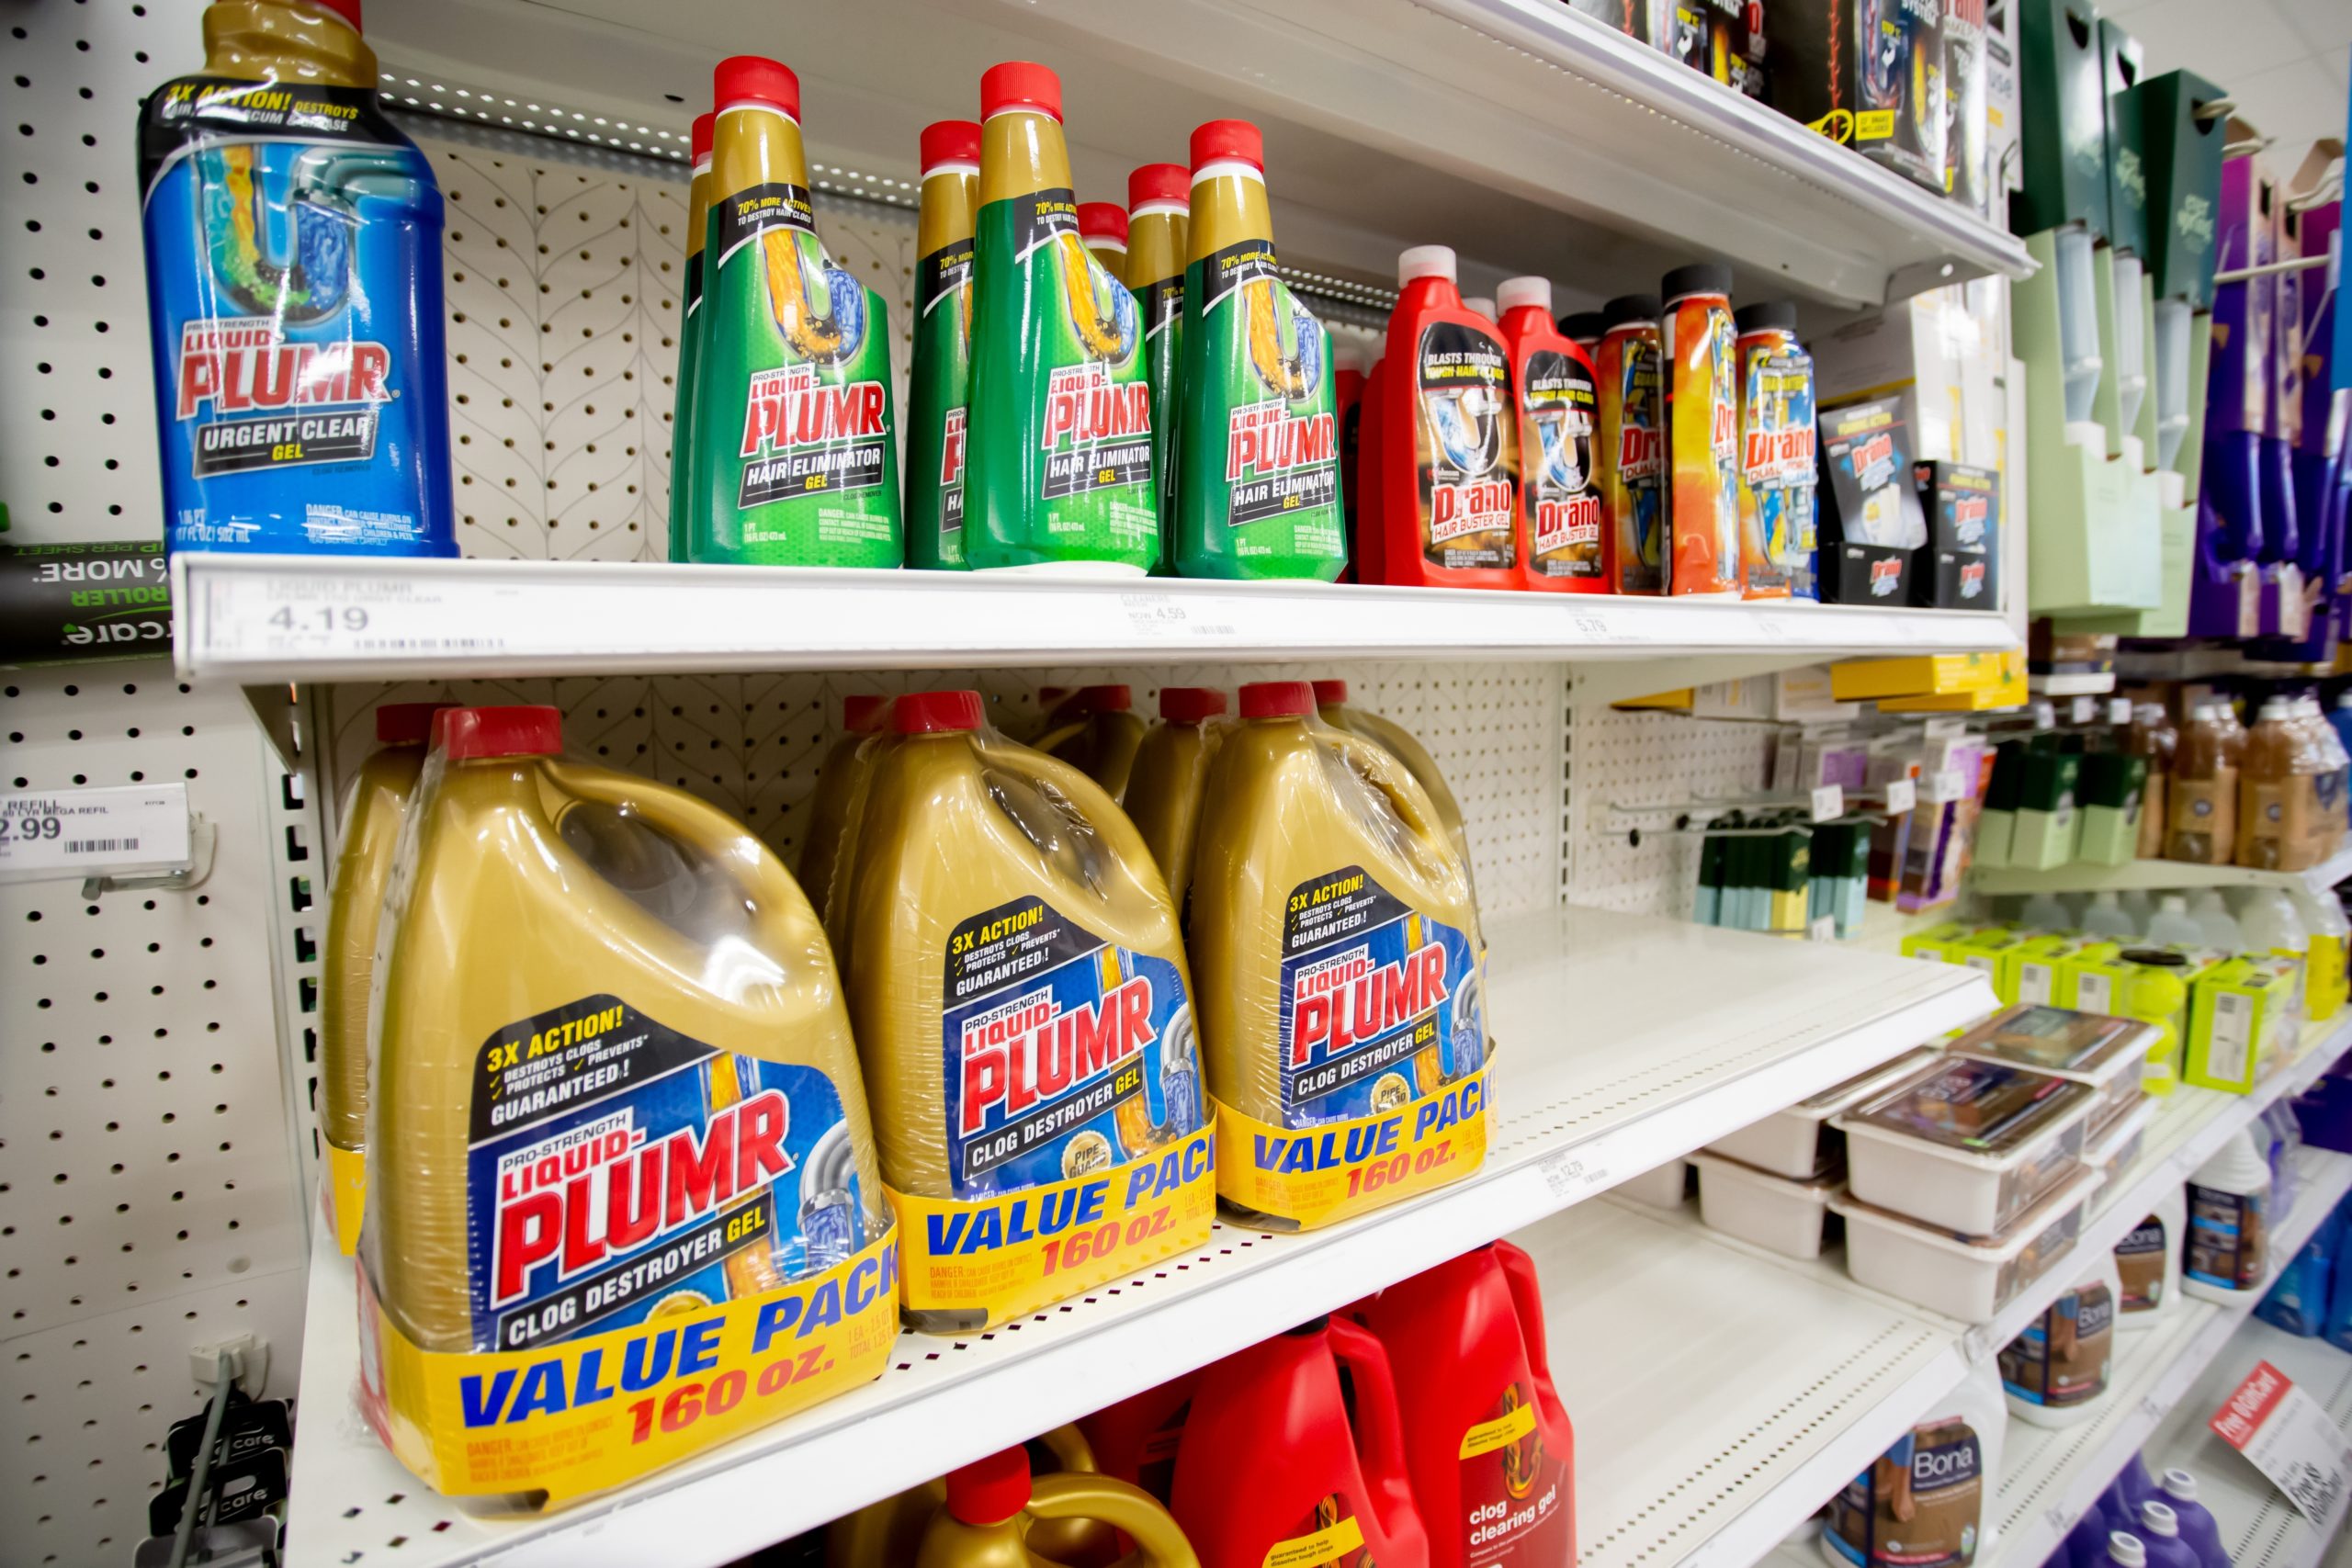 A view of several shelves dedicated to drain cleaning products like liquid plumber